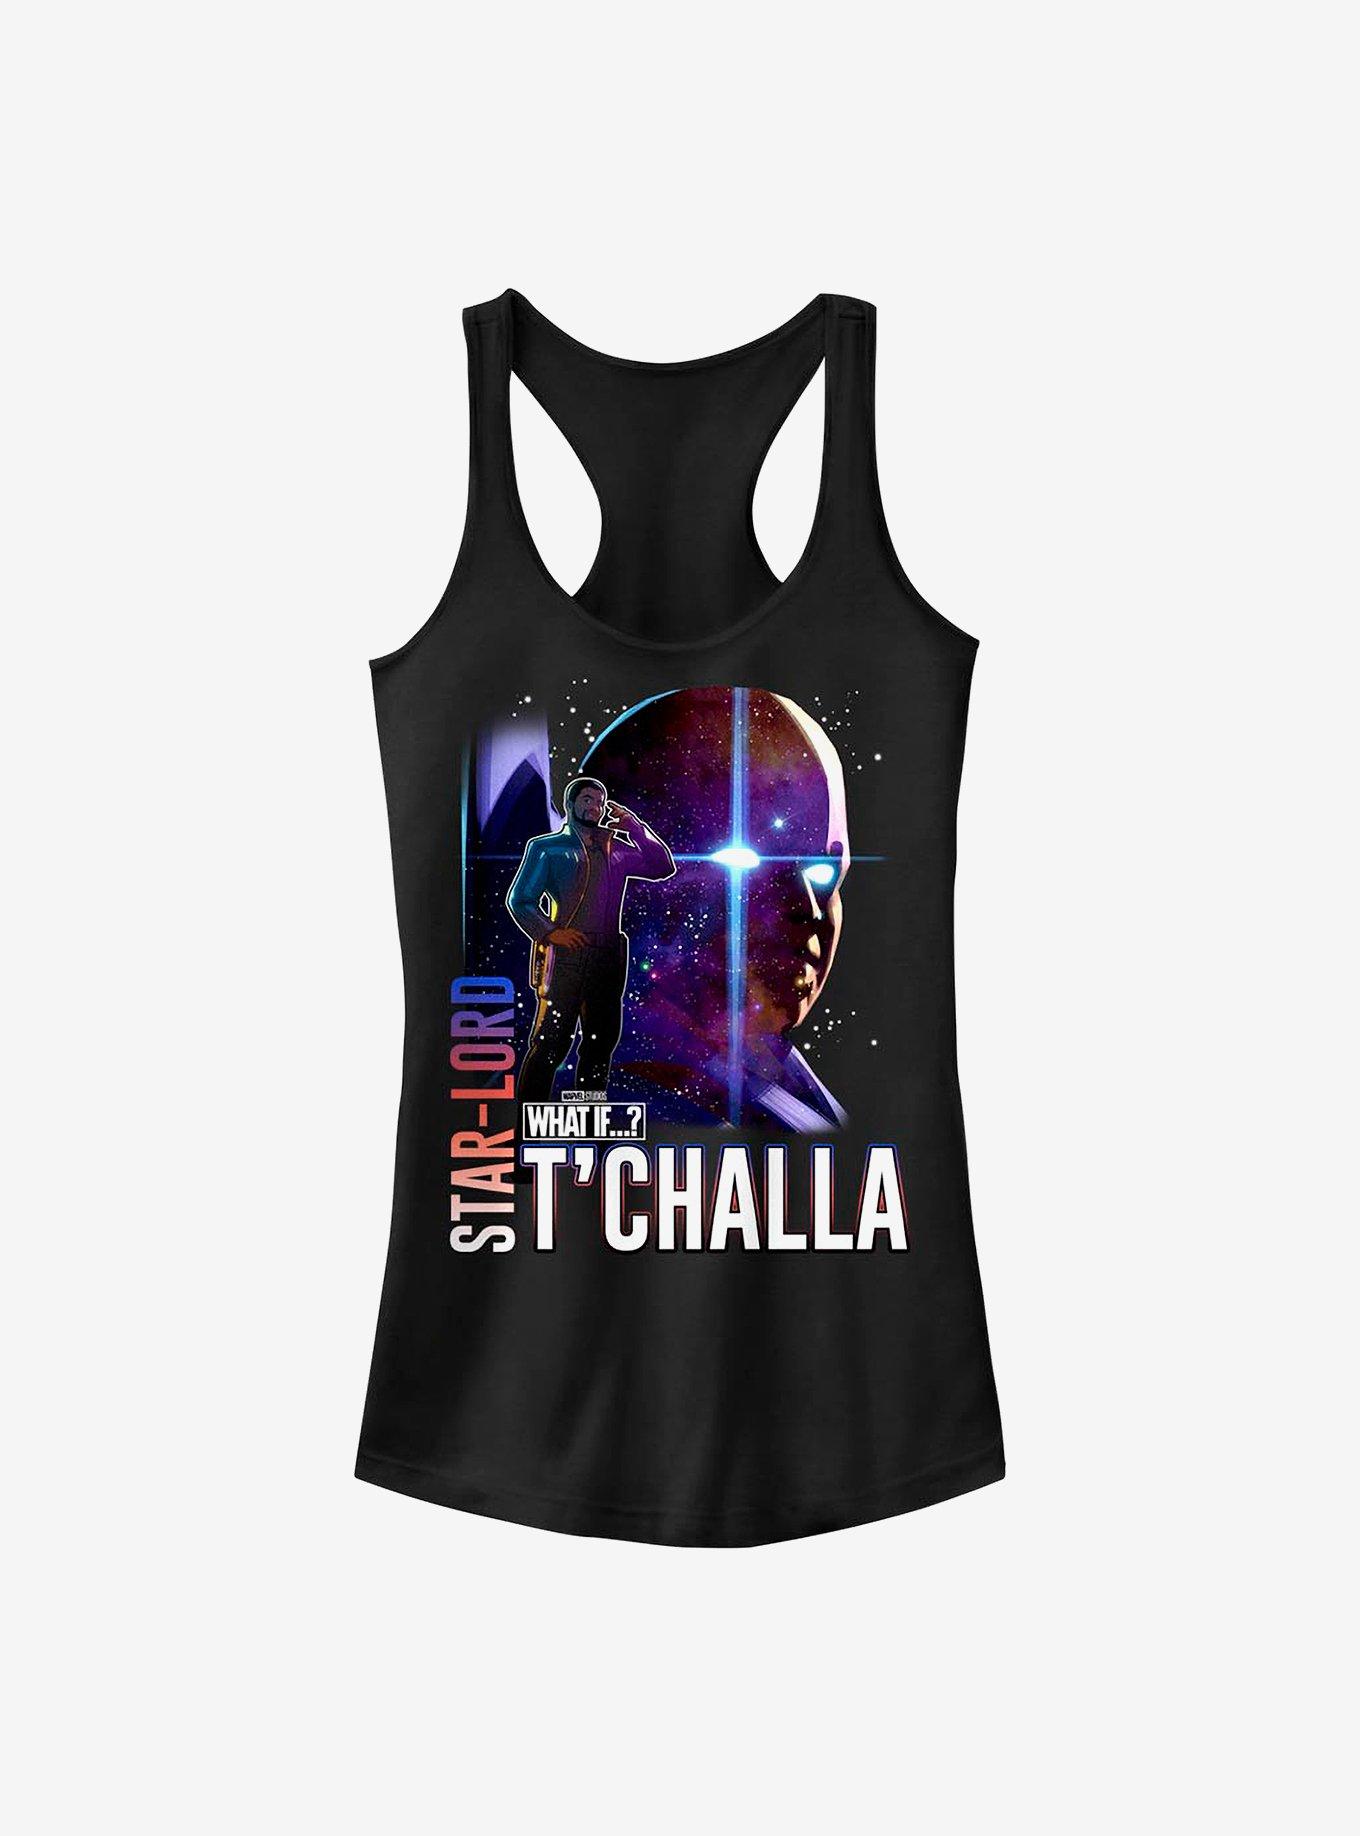 Marvel What If...? Star-Lord Watcher T'Challa Girls Tank